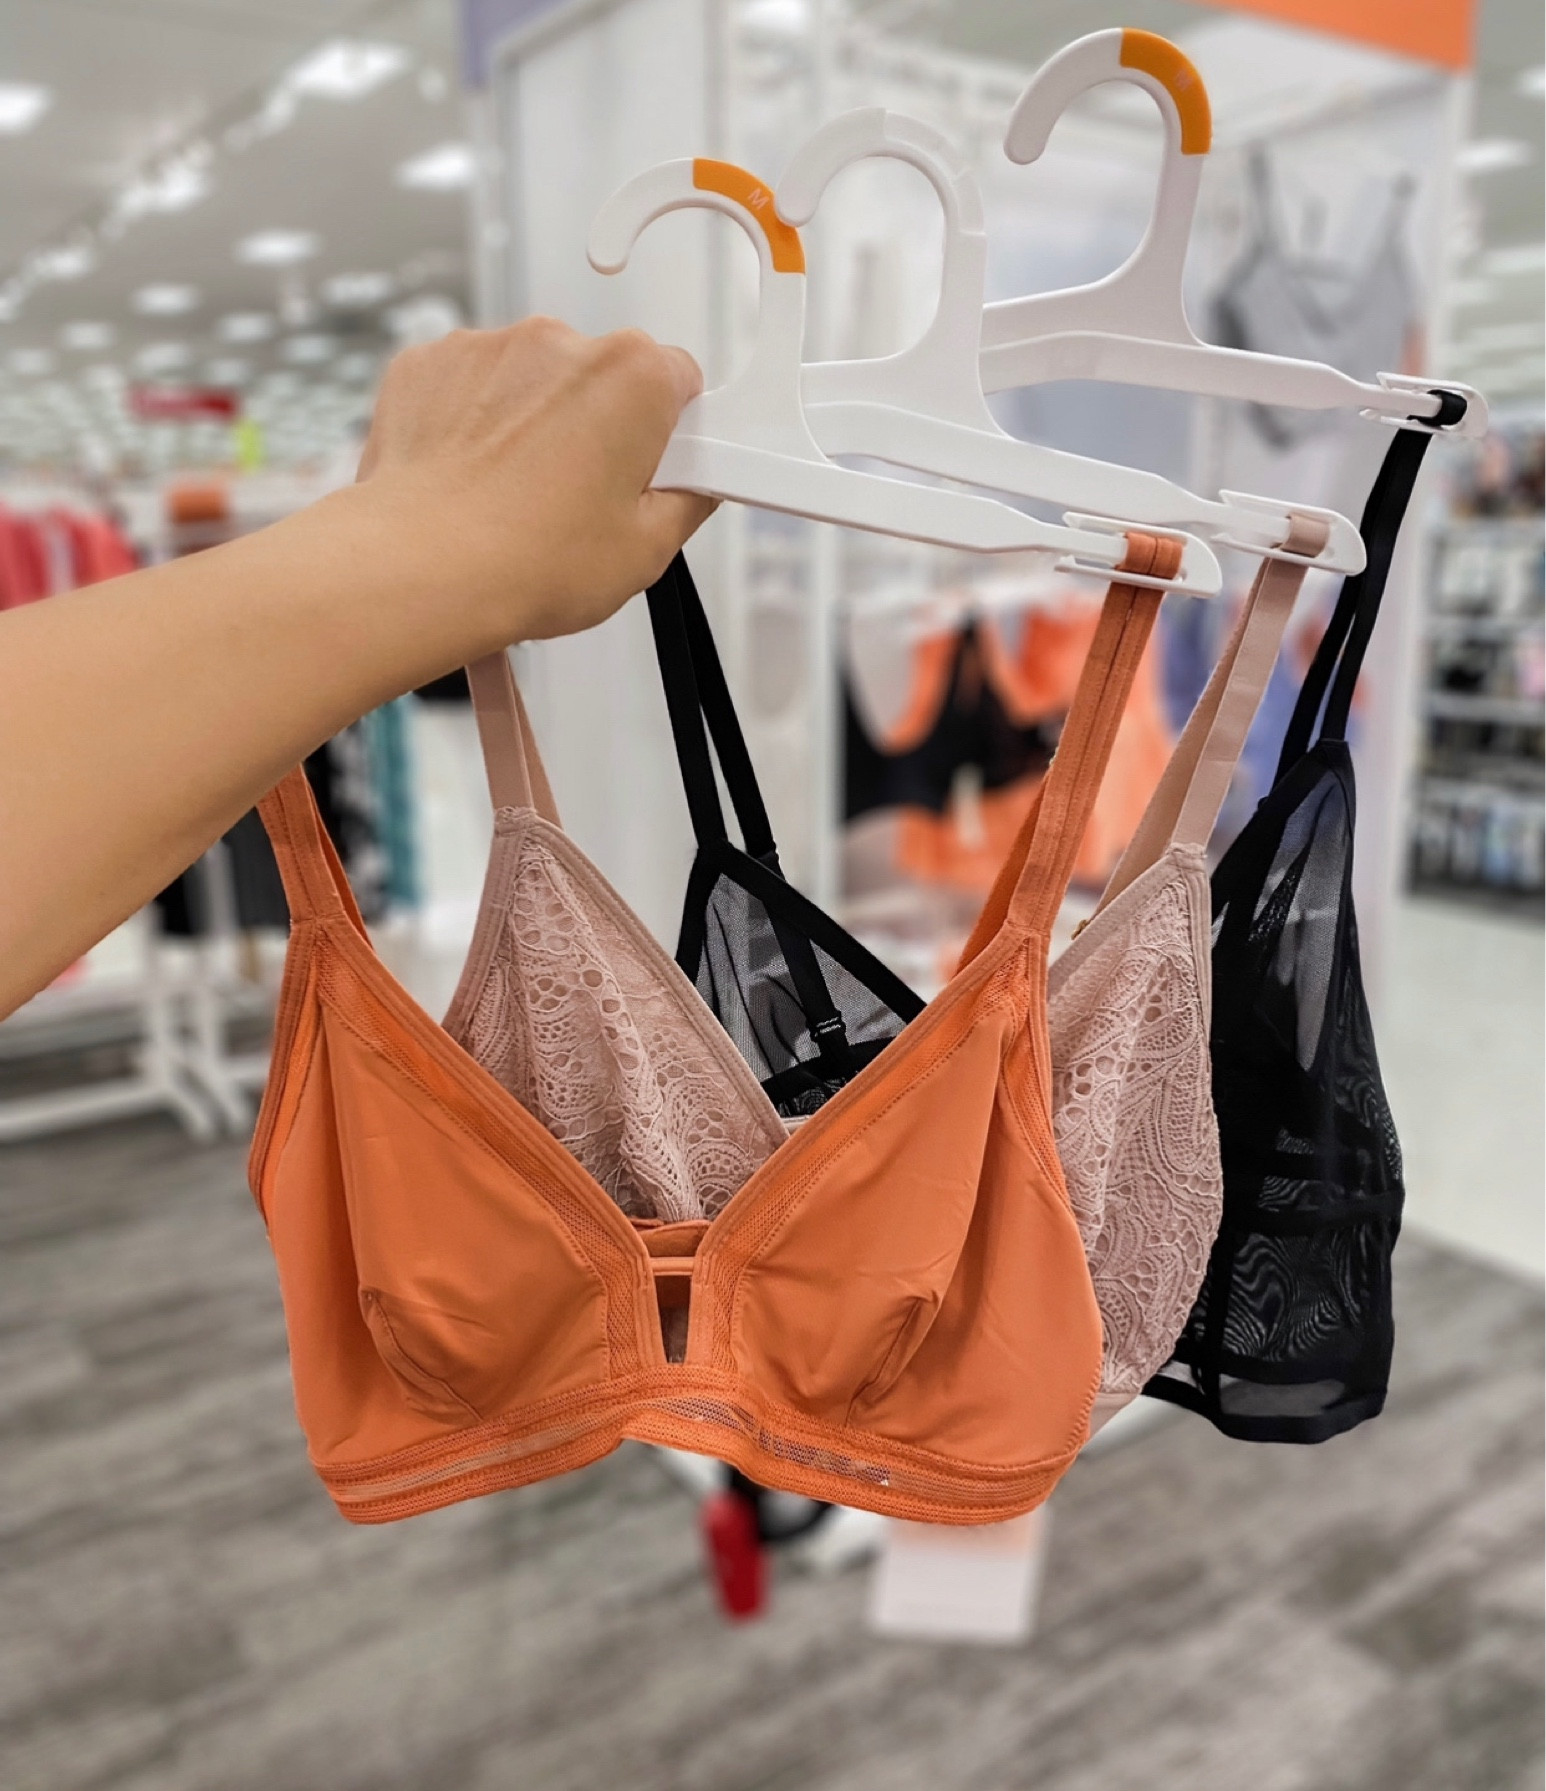 One of the most comy bralettes! Auden at target might be one of my fav